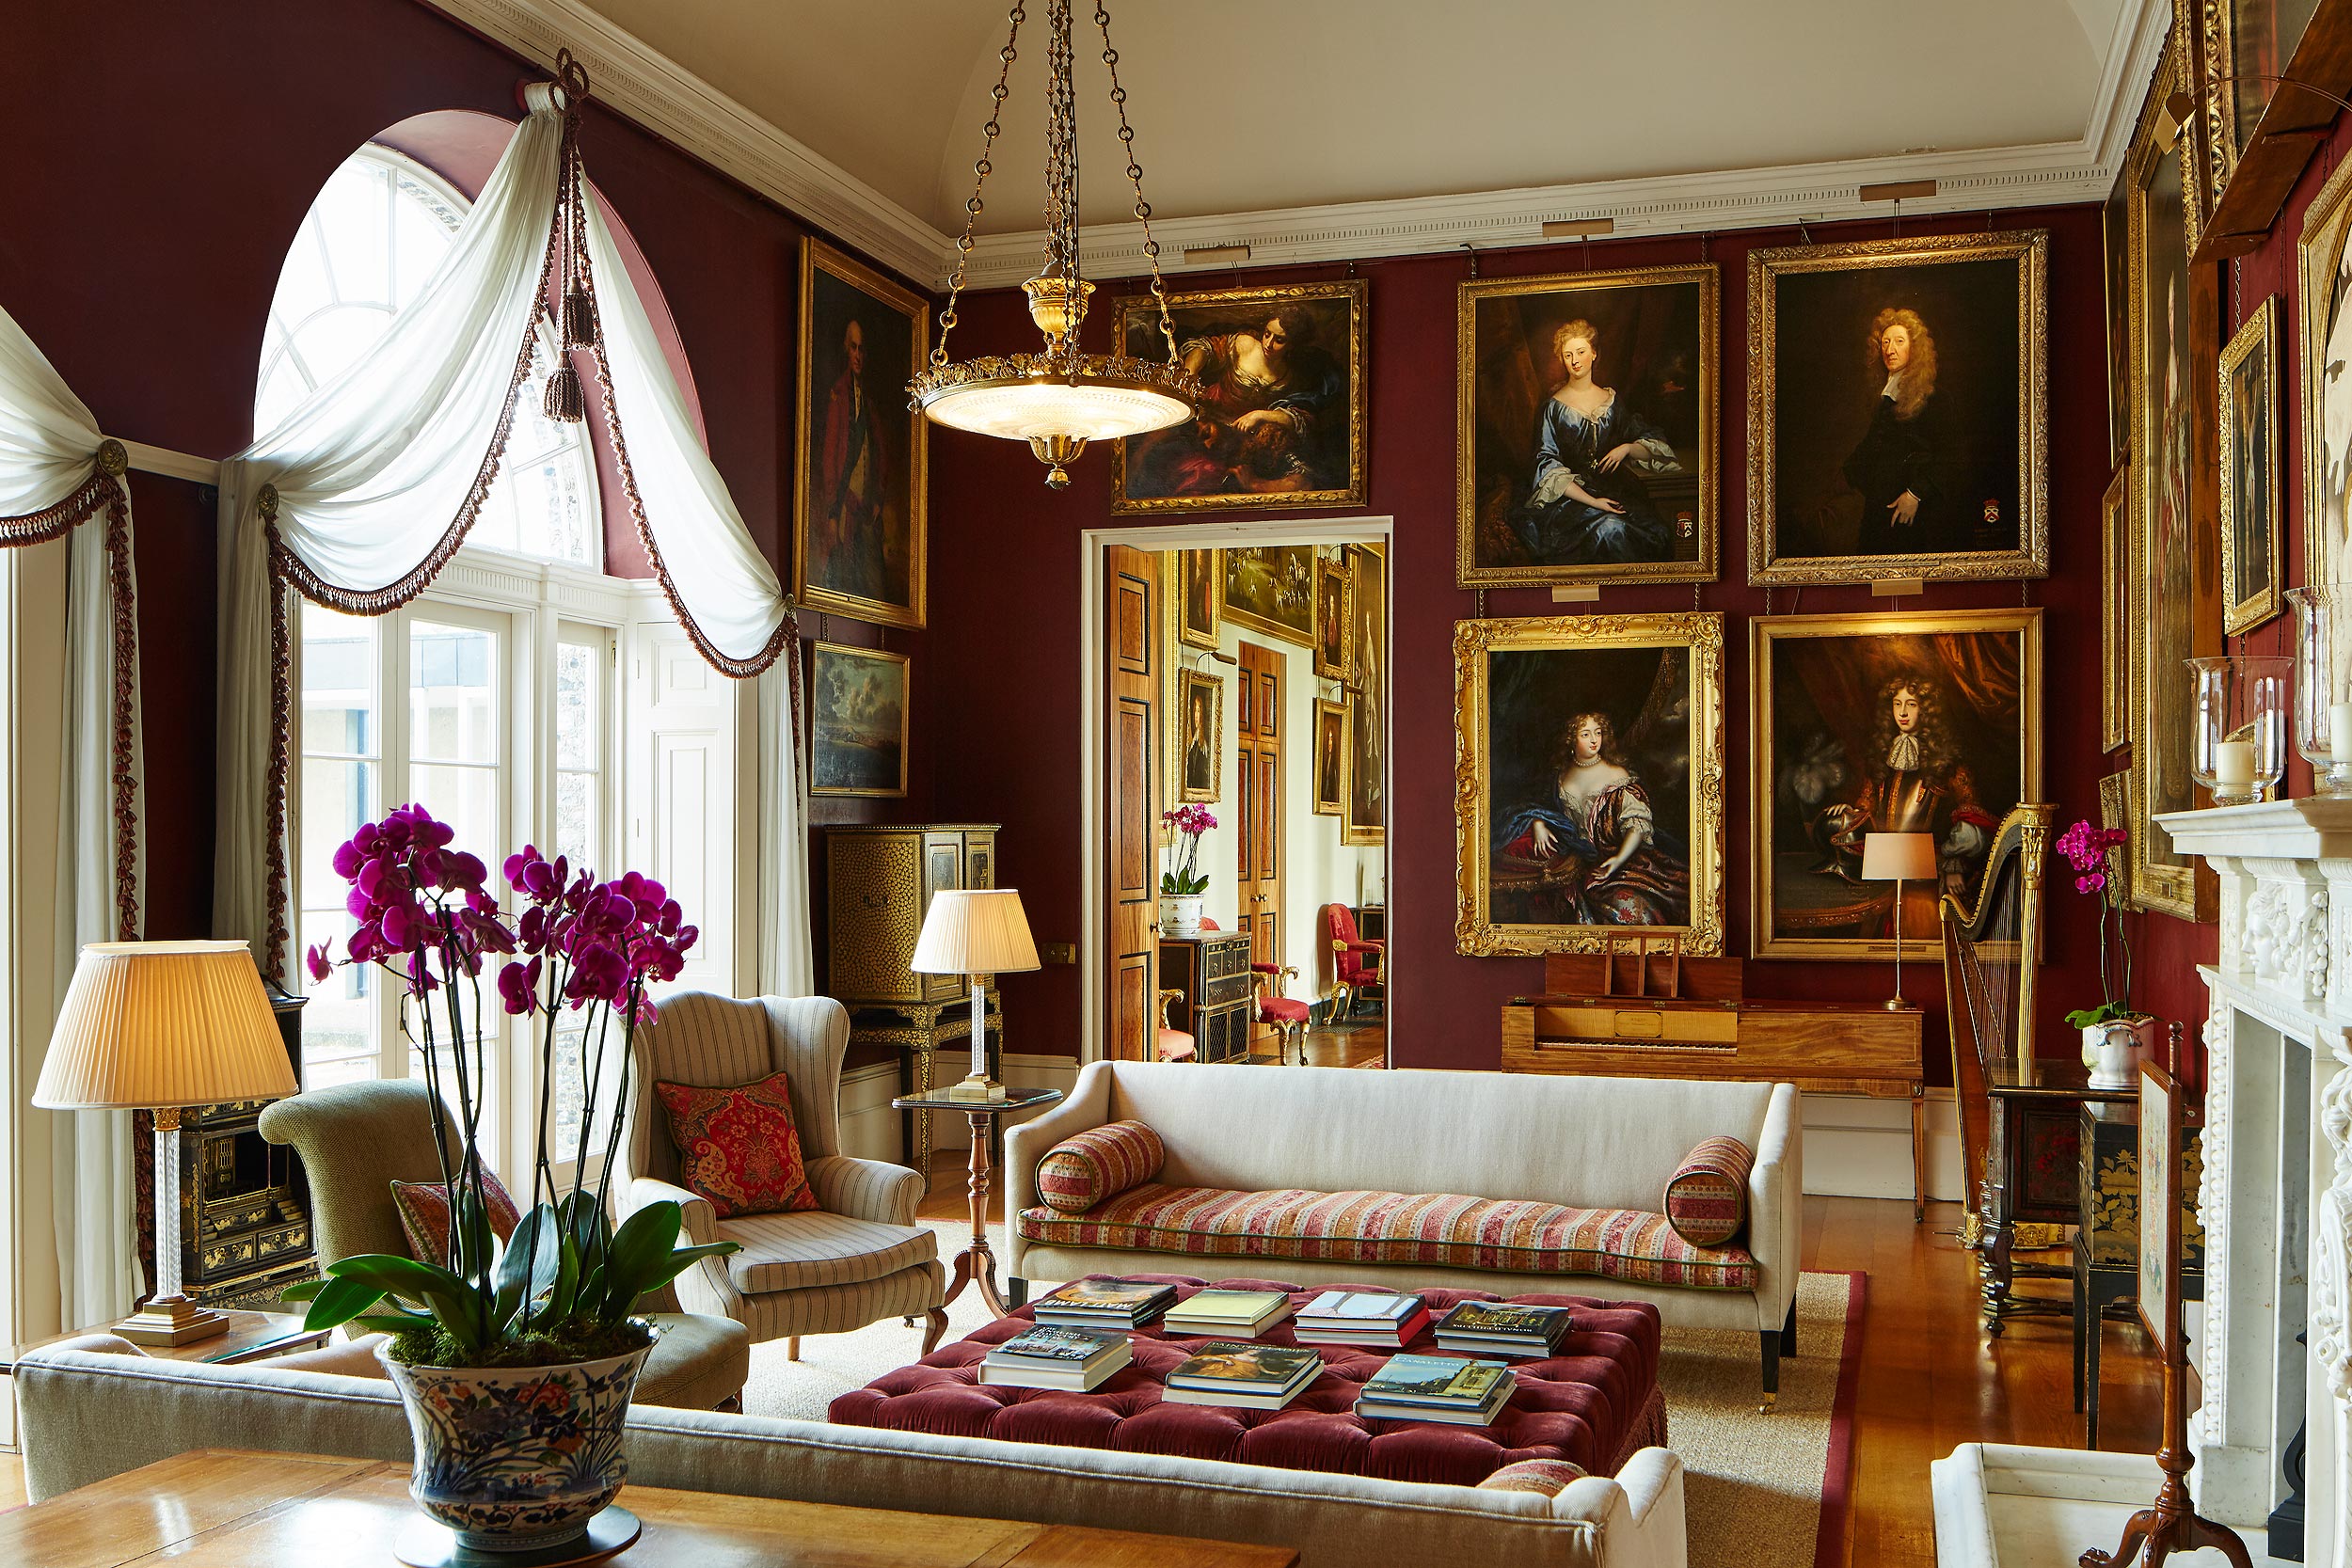 Goodwood House, Sussex, UK.  Interior photography by Mike Caldwell